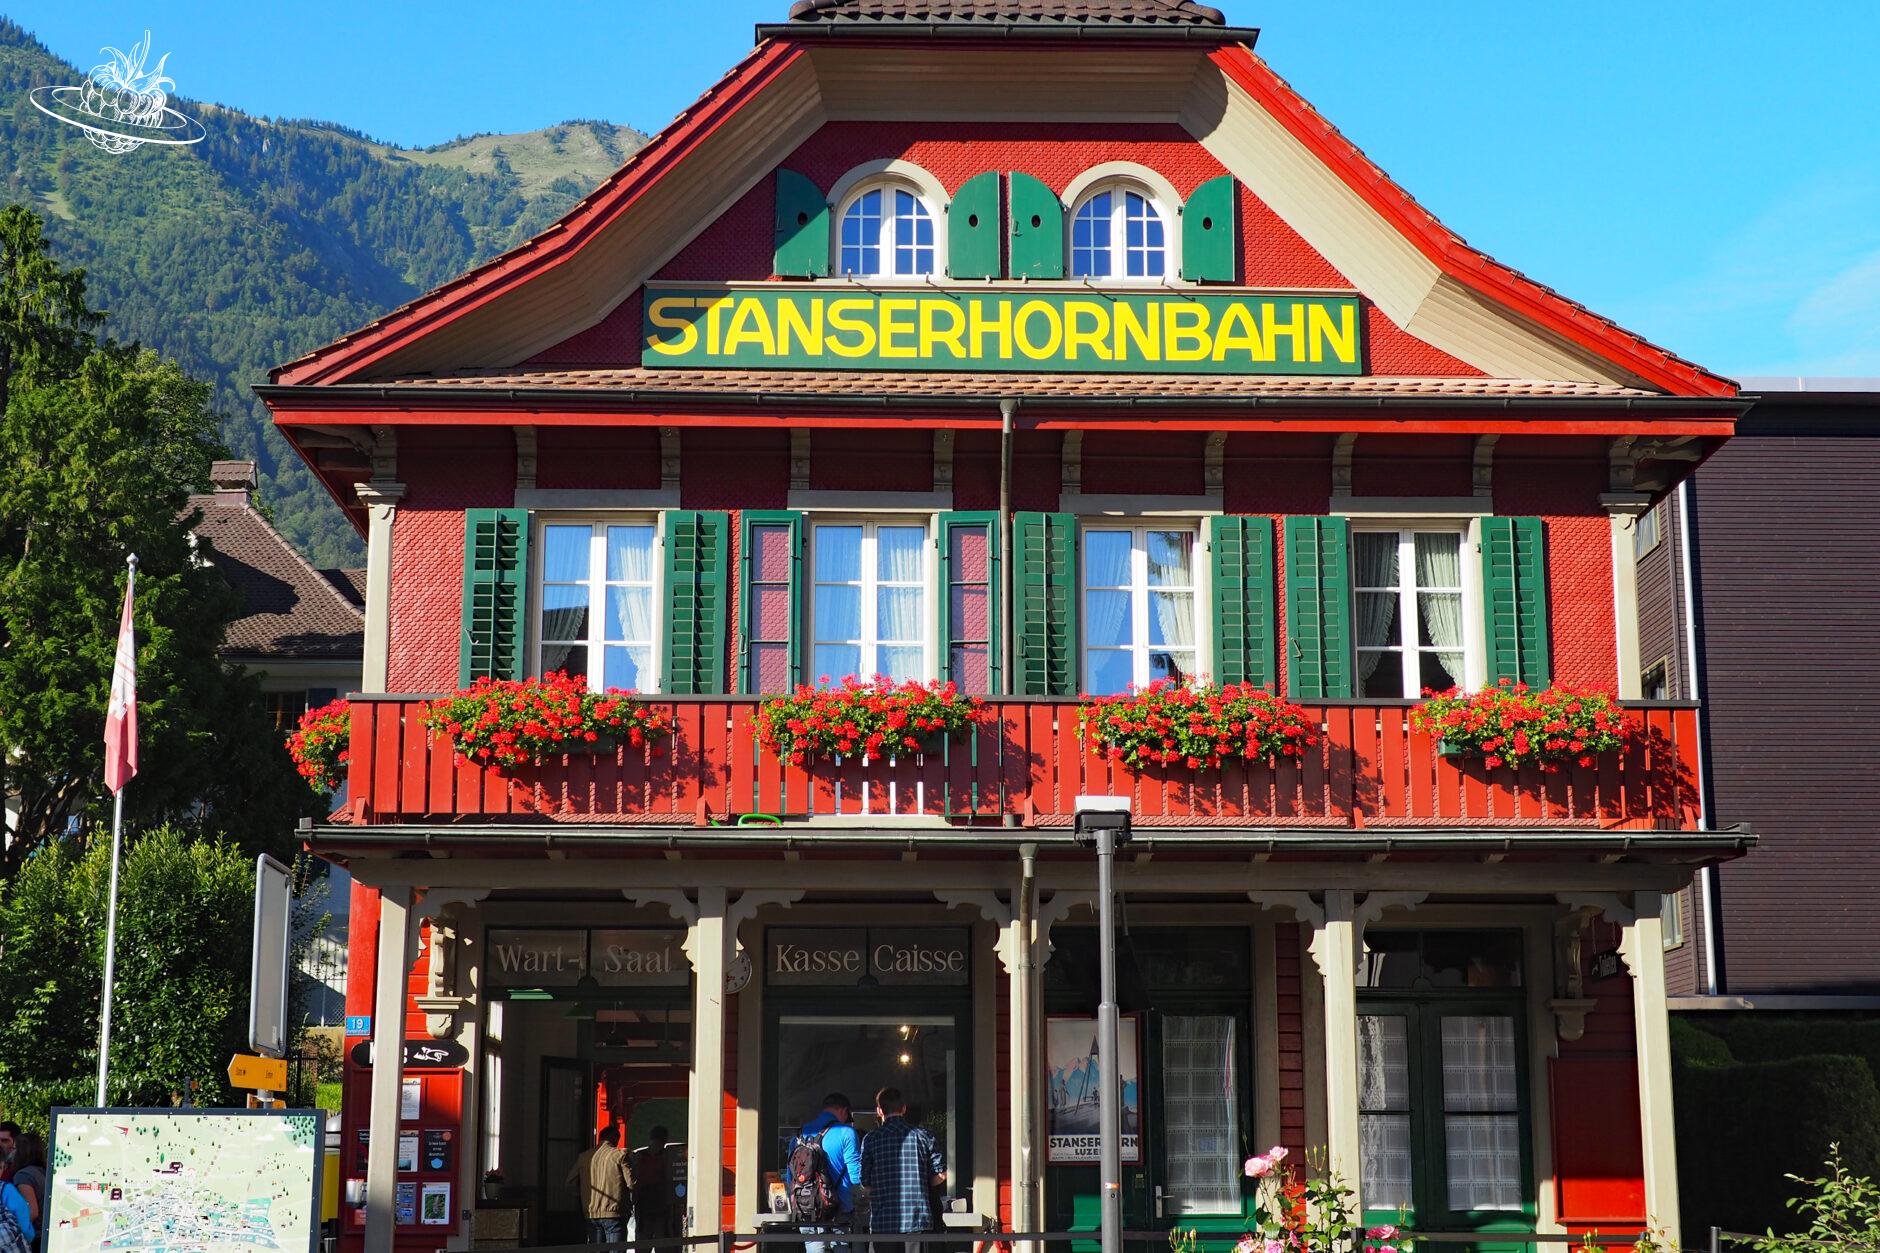 traditionalles Haus, welches als Bahnstation fungiert